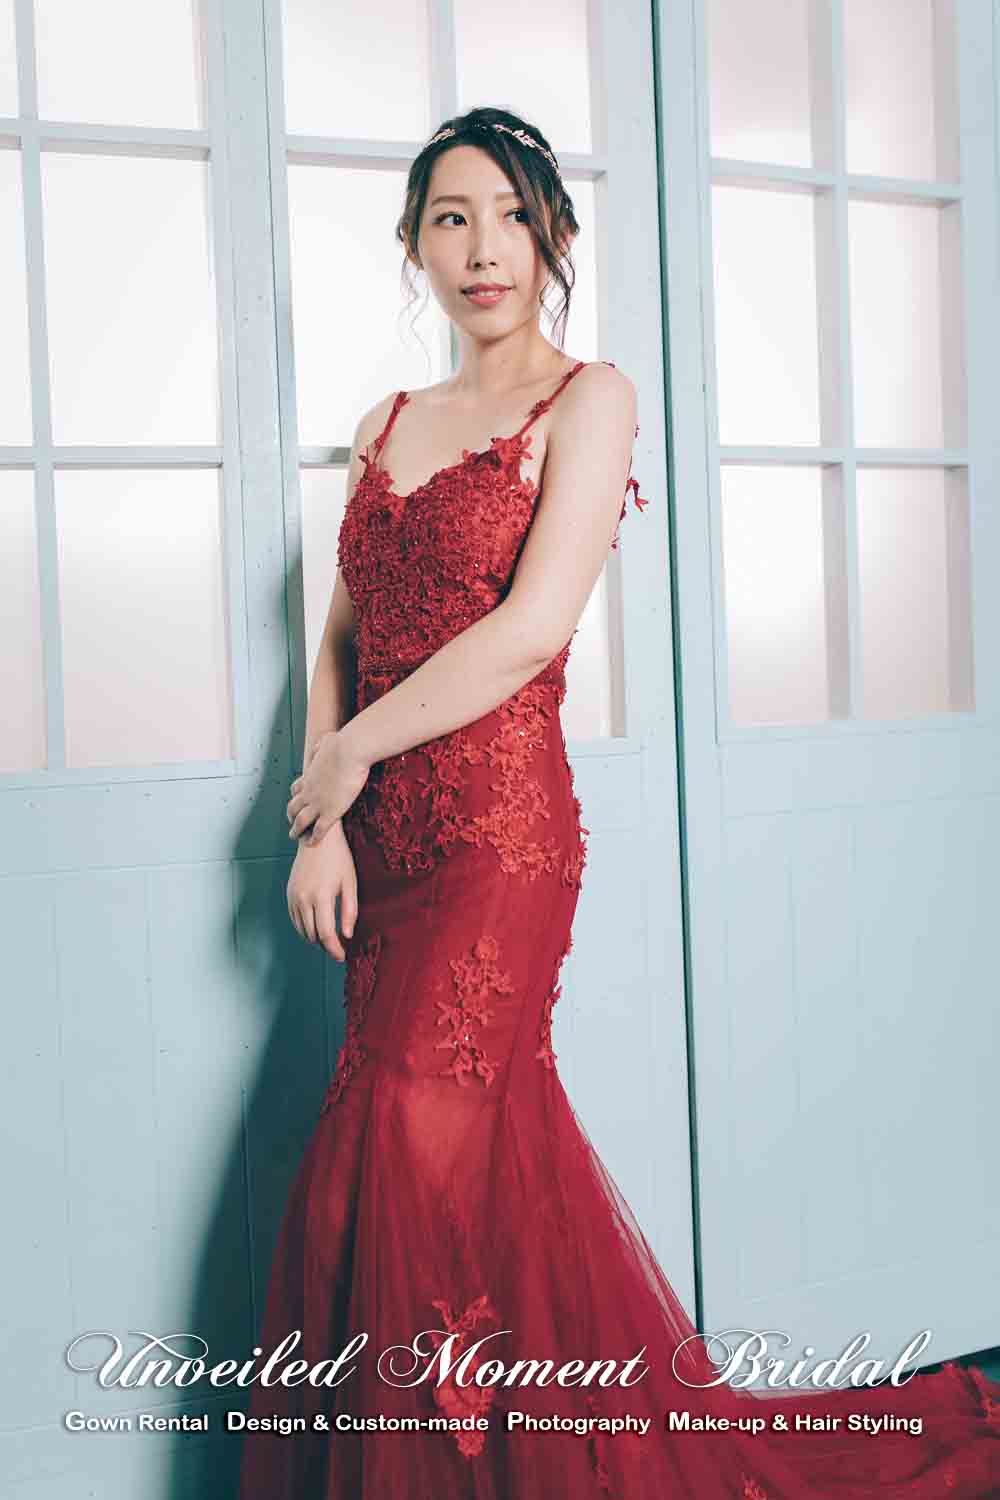 Bride wearing spaghetti straps, sweetheart neckline, royal red evening dress with see-through skirt bottom and decorated with beaded lace appliques 吊帶, 心形胸, 短裙加蕾絲釘珠透視拖尾紅色晩裝